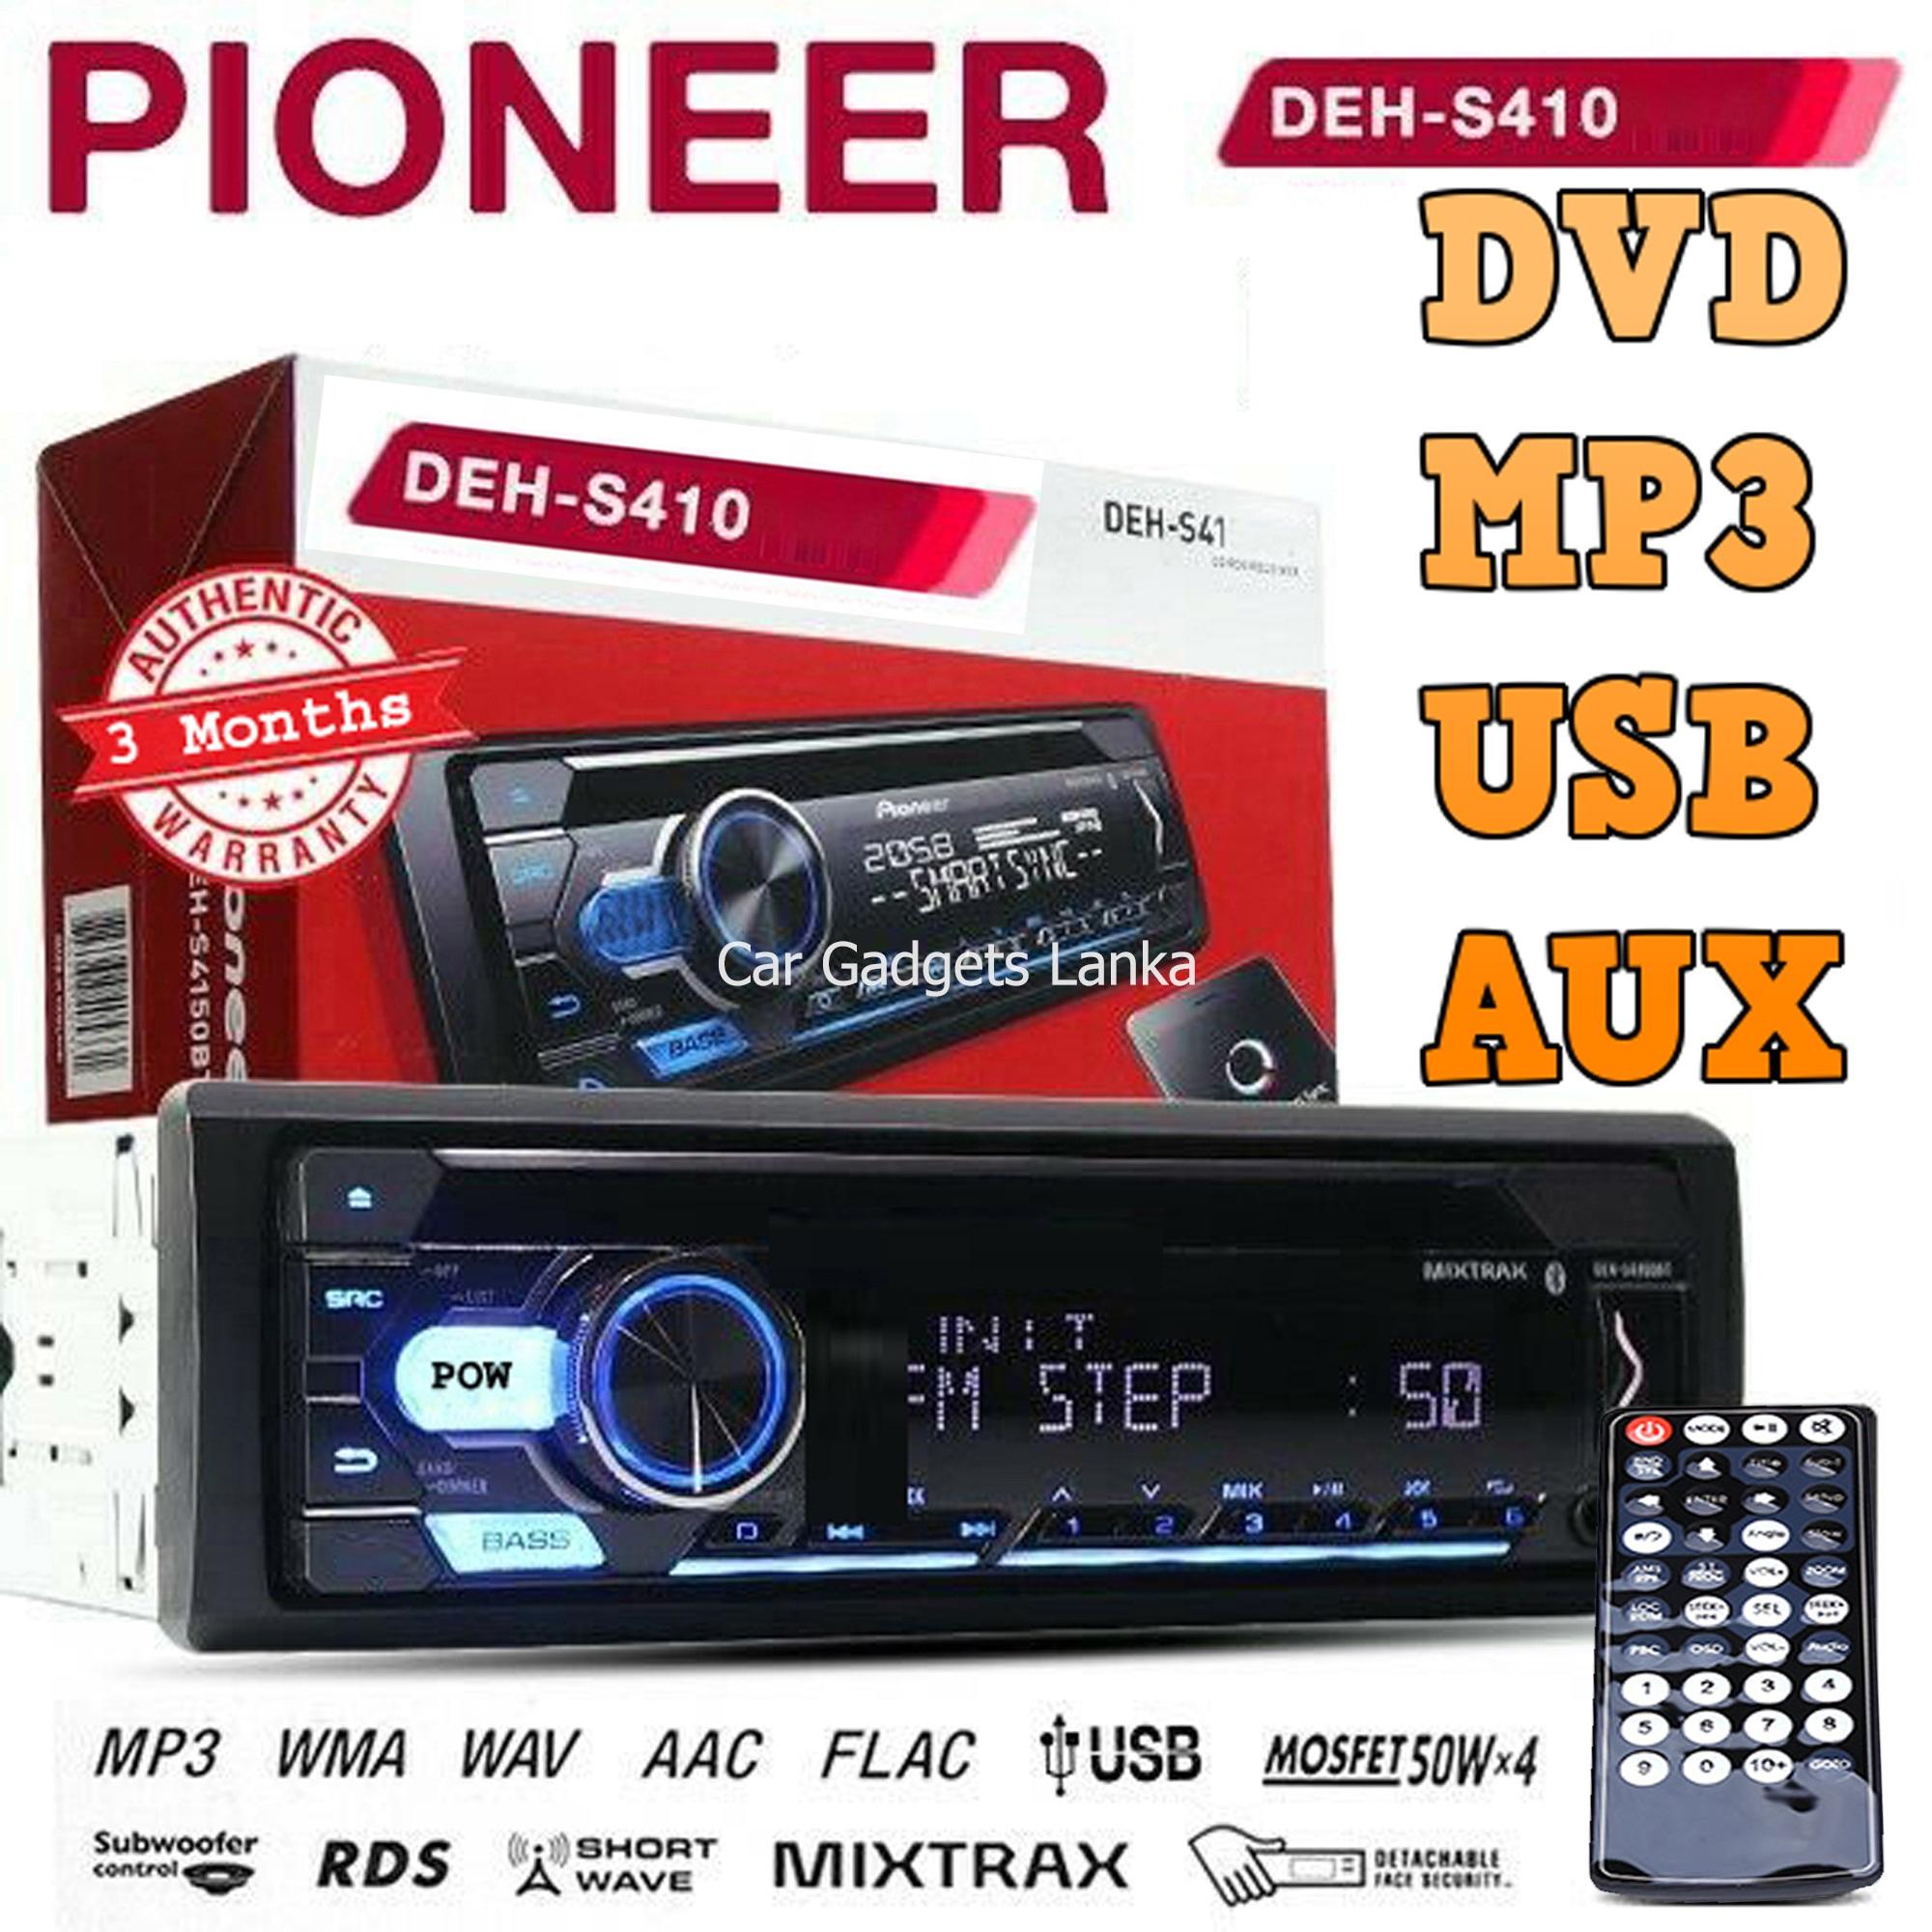 Pioneer Car Stereo Fm Radio Dvd Vcd Cd Player With Mp3 Usb Aux